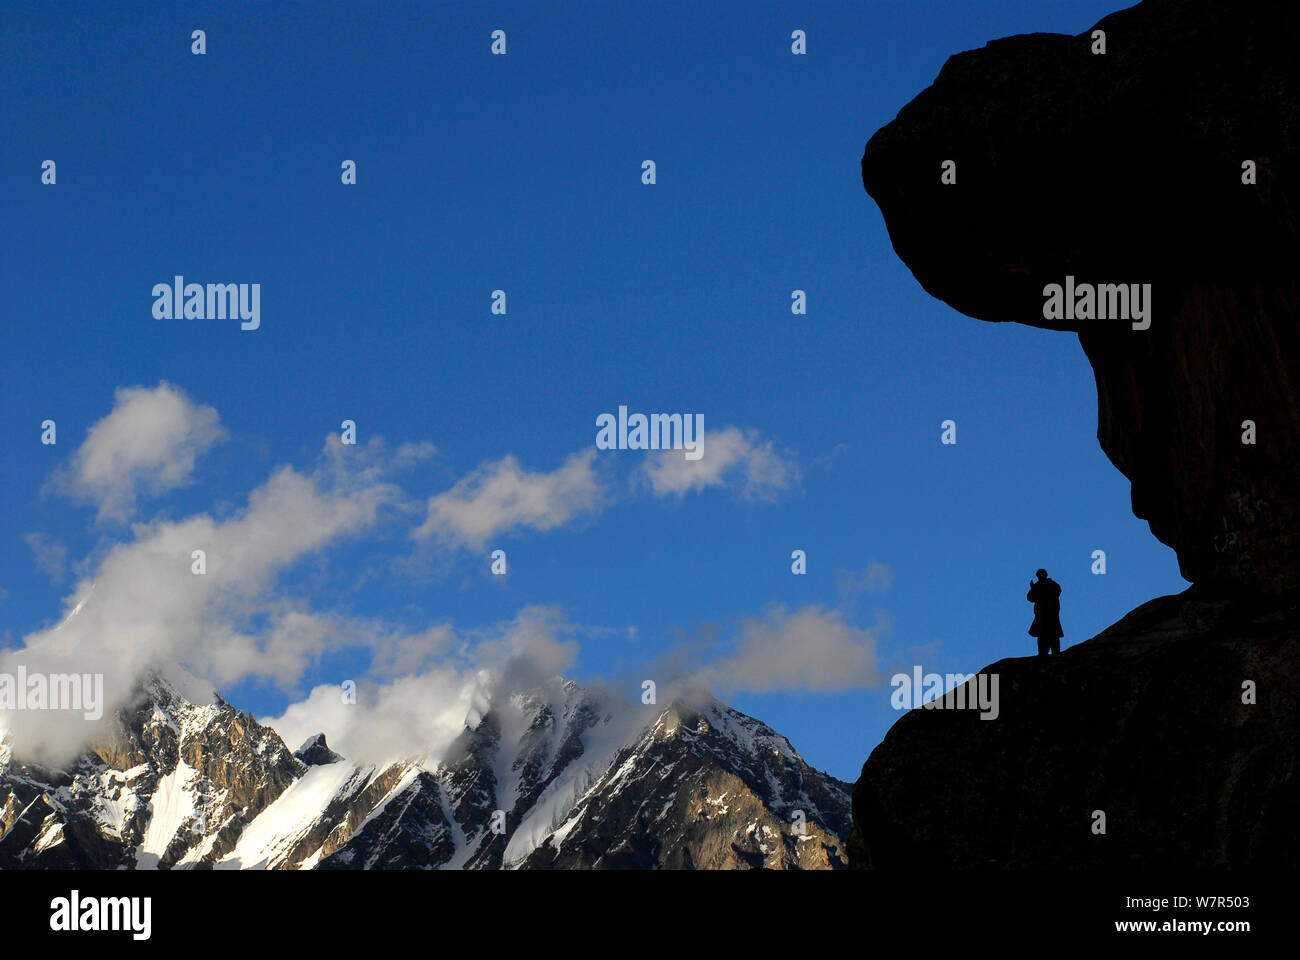 A Balti porter silhouetted standing on a rock, with mountains in the distance, Urdukas Camp (4,000m), Baltoro Glacier, Central Karakoram National Park, Pakistan, July 2007. Stock Photo